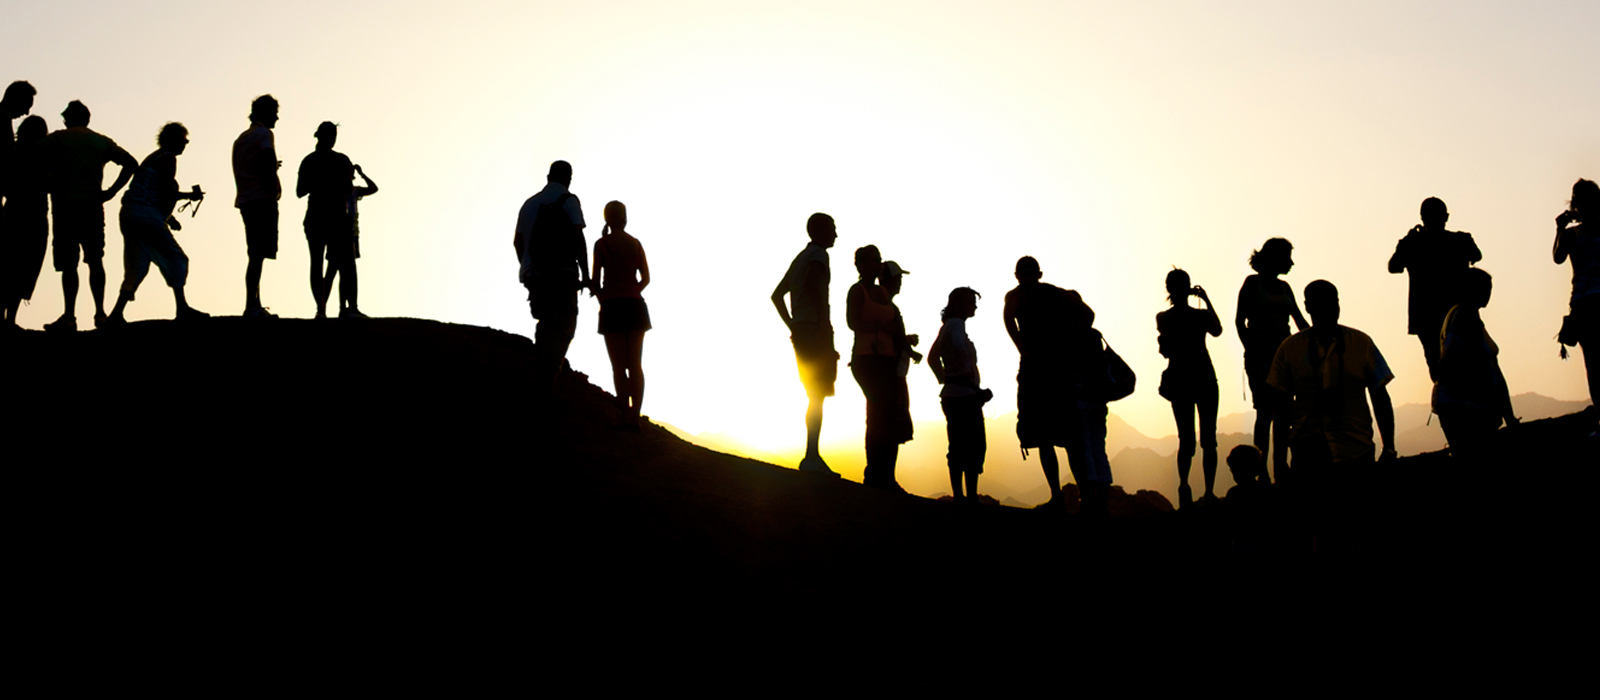 a group of people standing on a hill, silhouetted by the bright, warm, yellow sun in the background